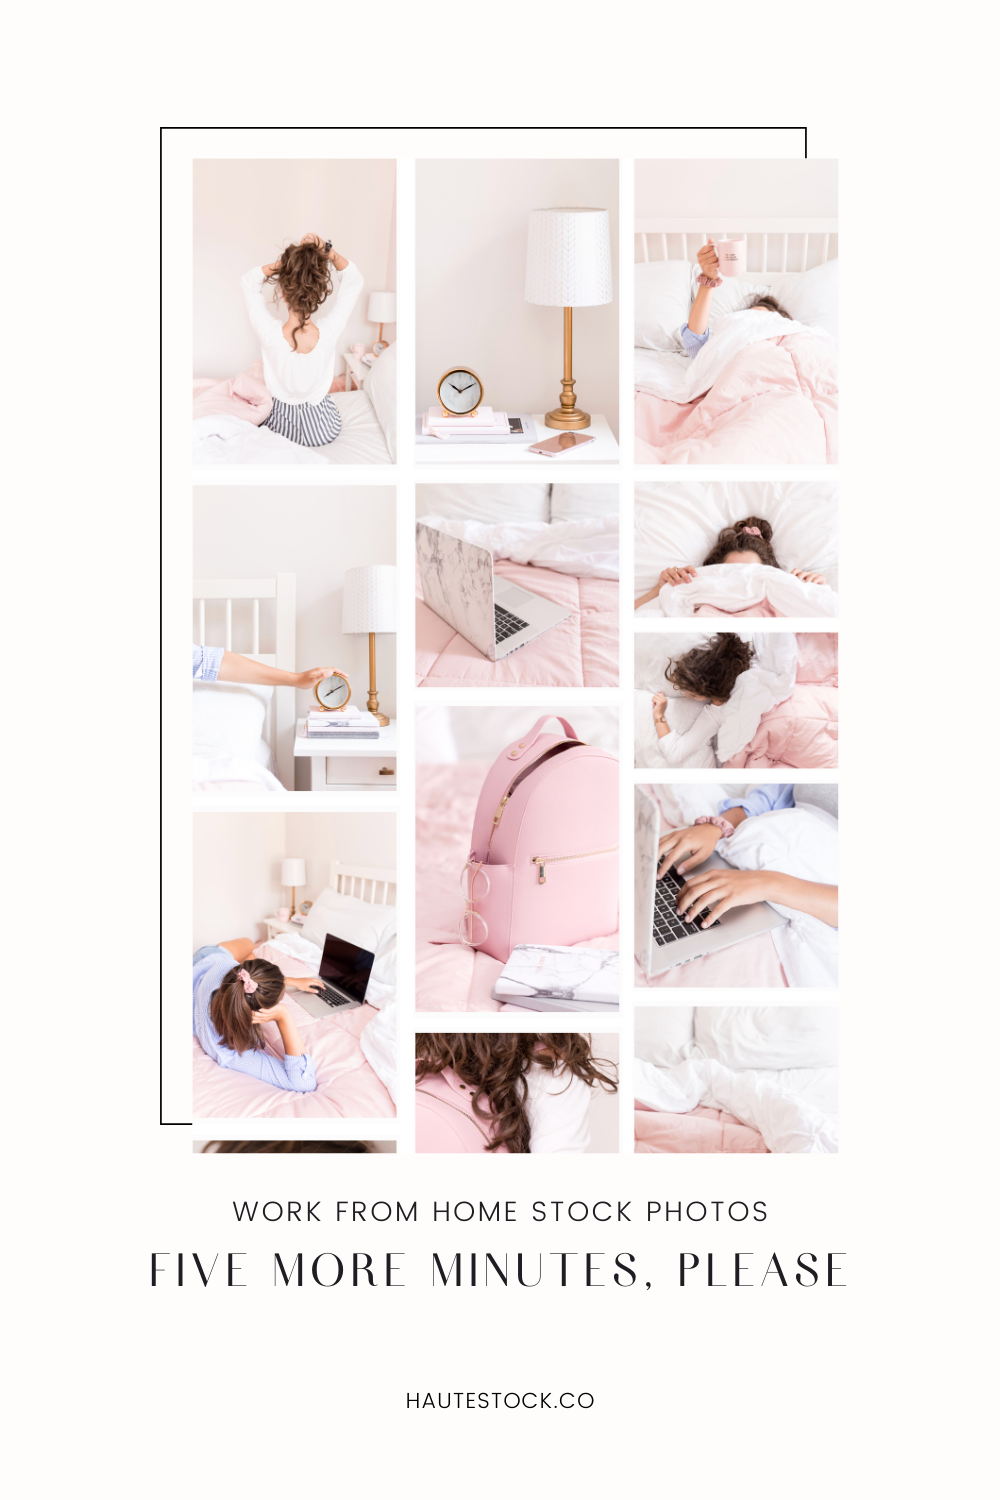 Morning routine and work from home stock photos for women bloggers and business owners